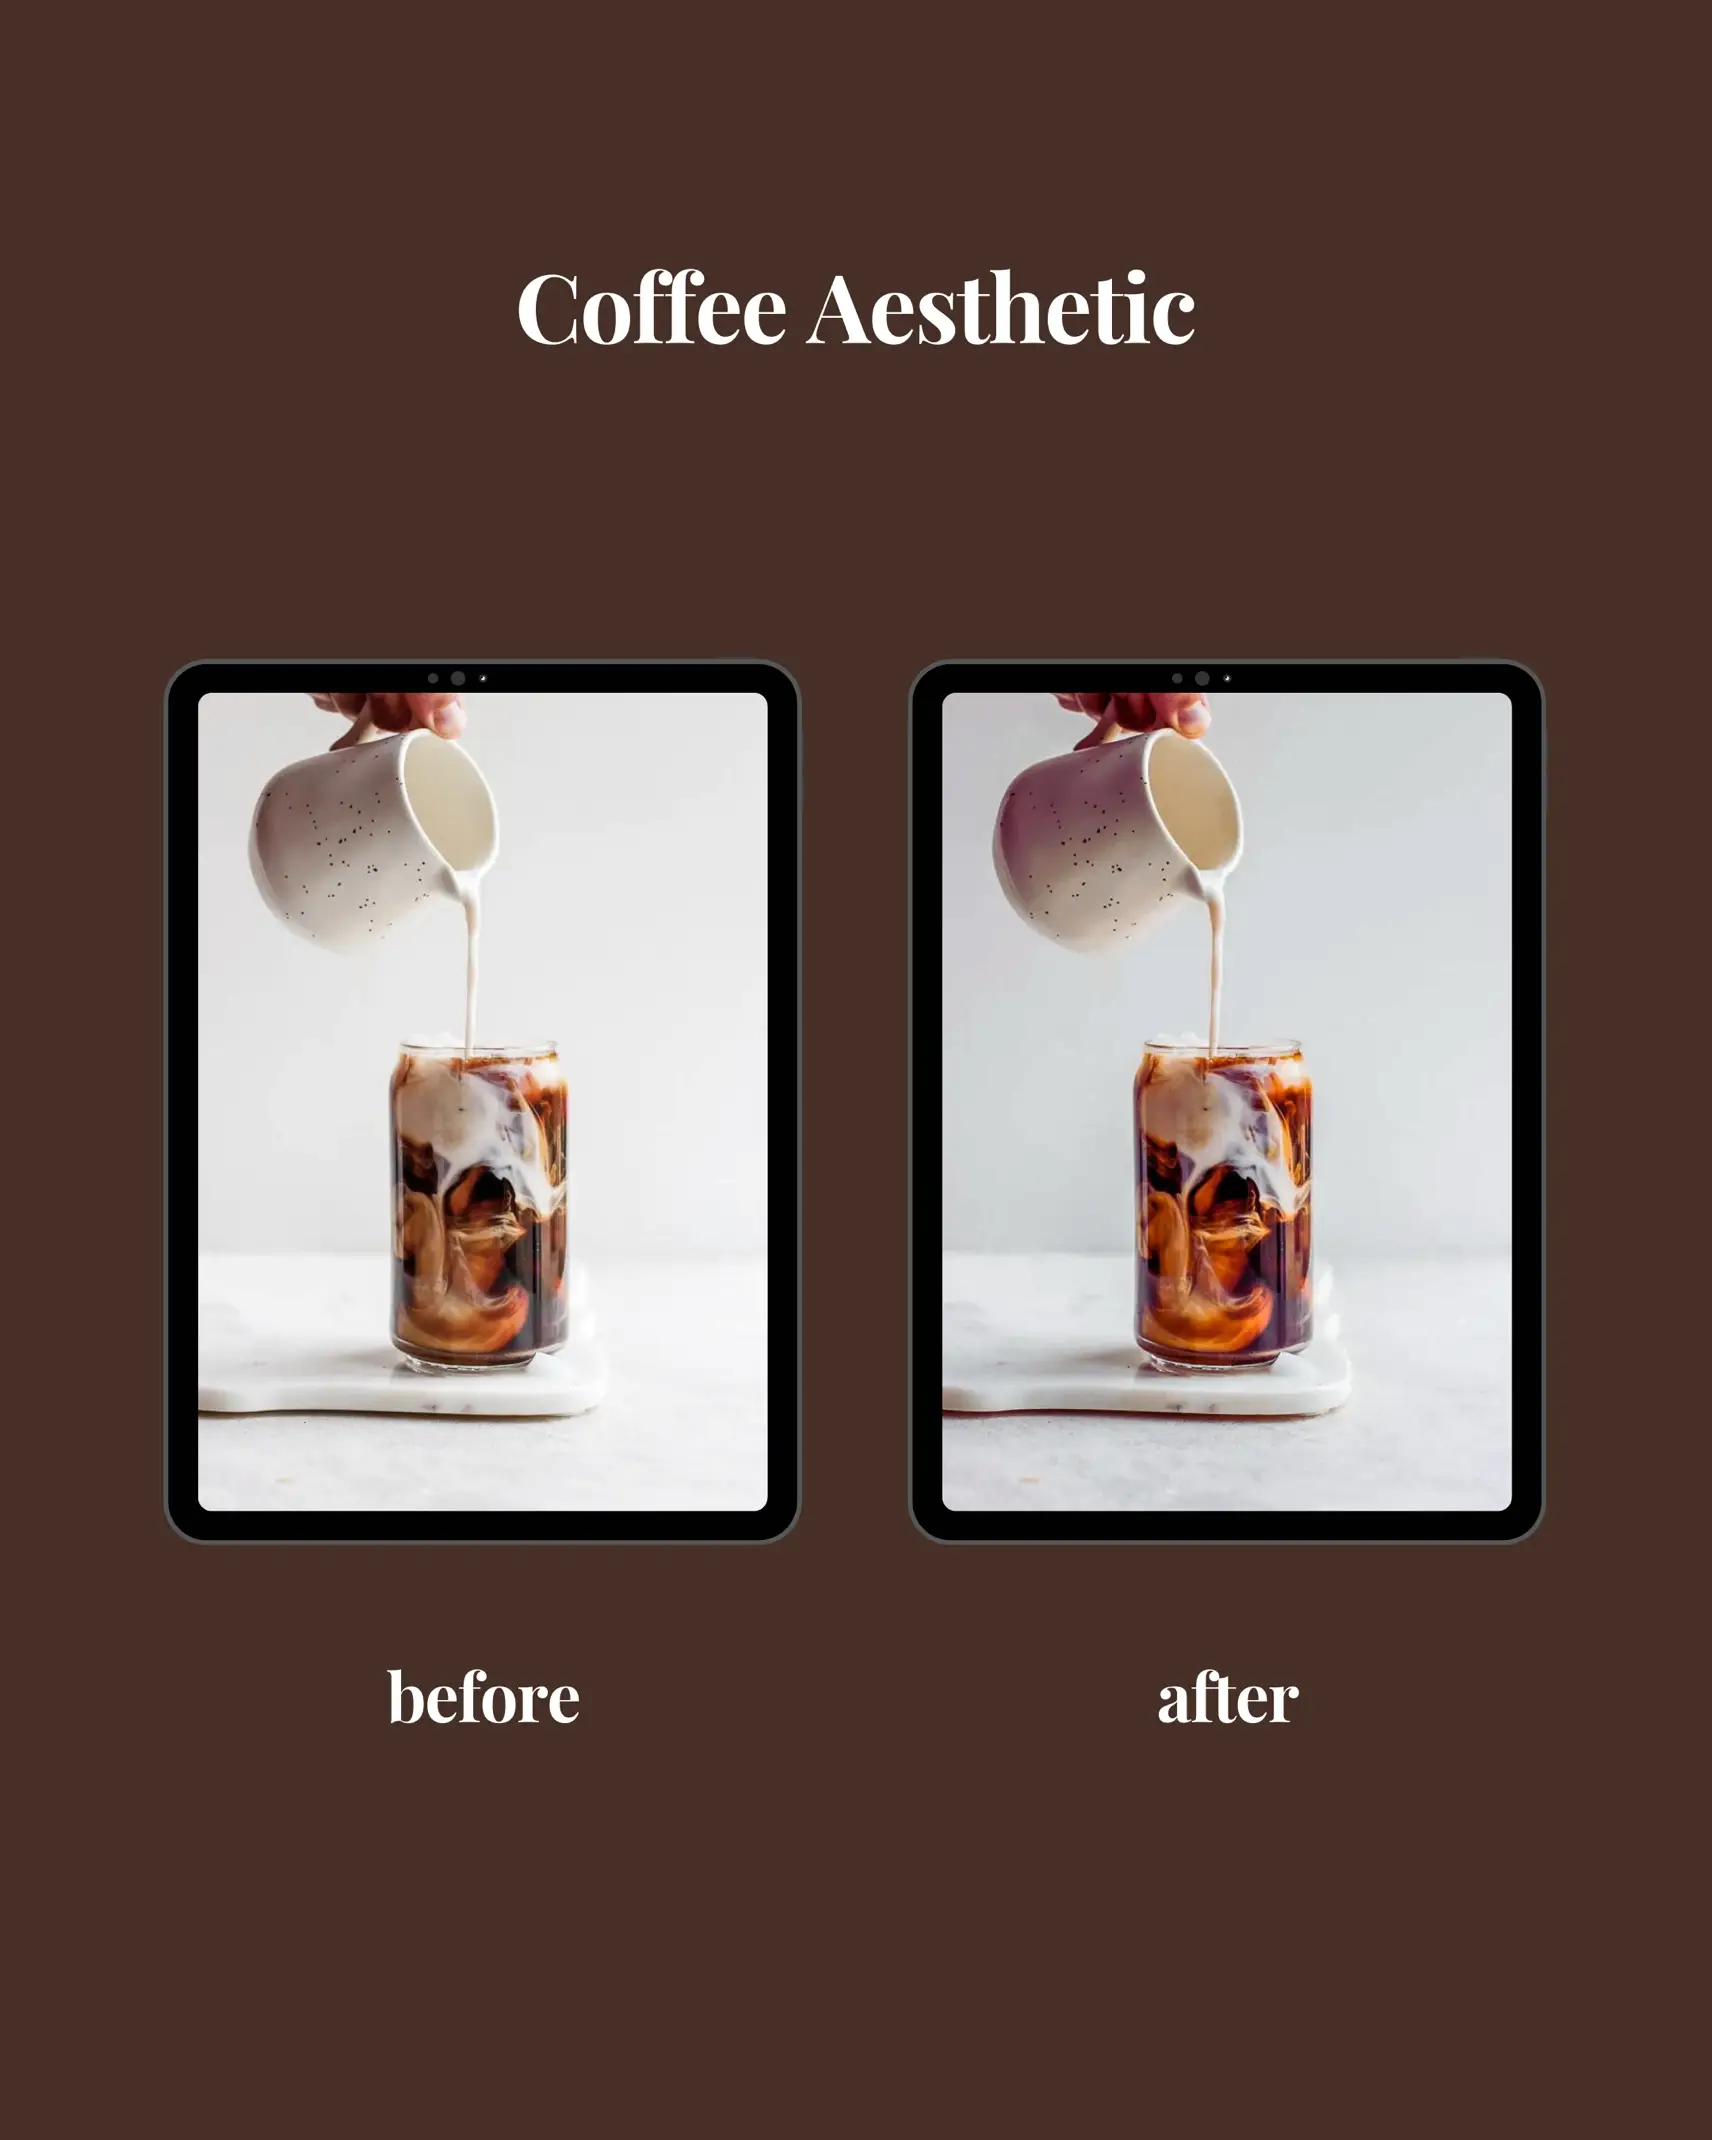  A coffee aesthetic before and after image.